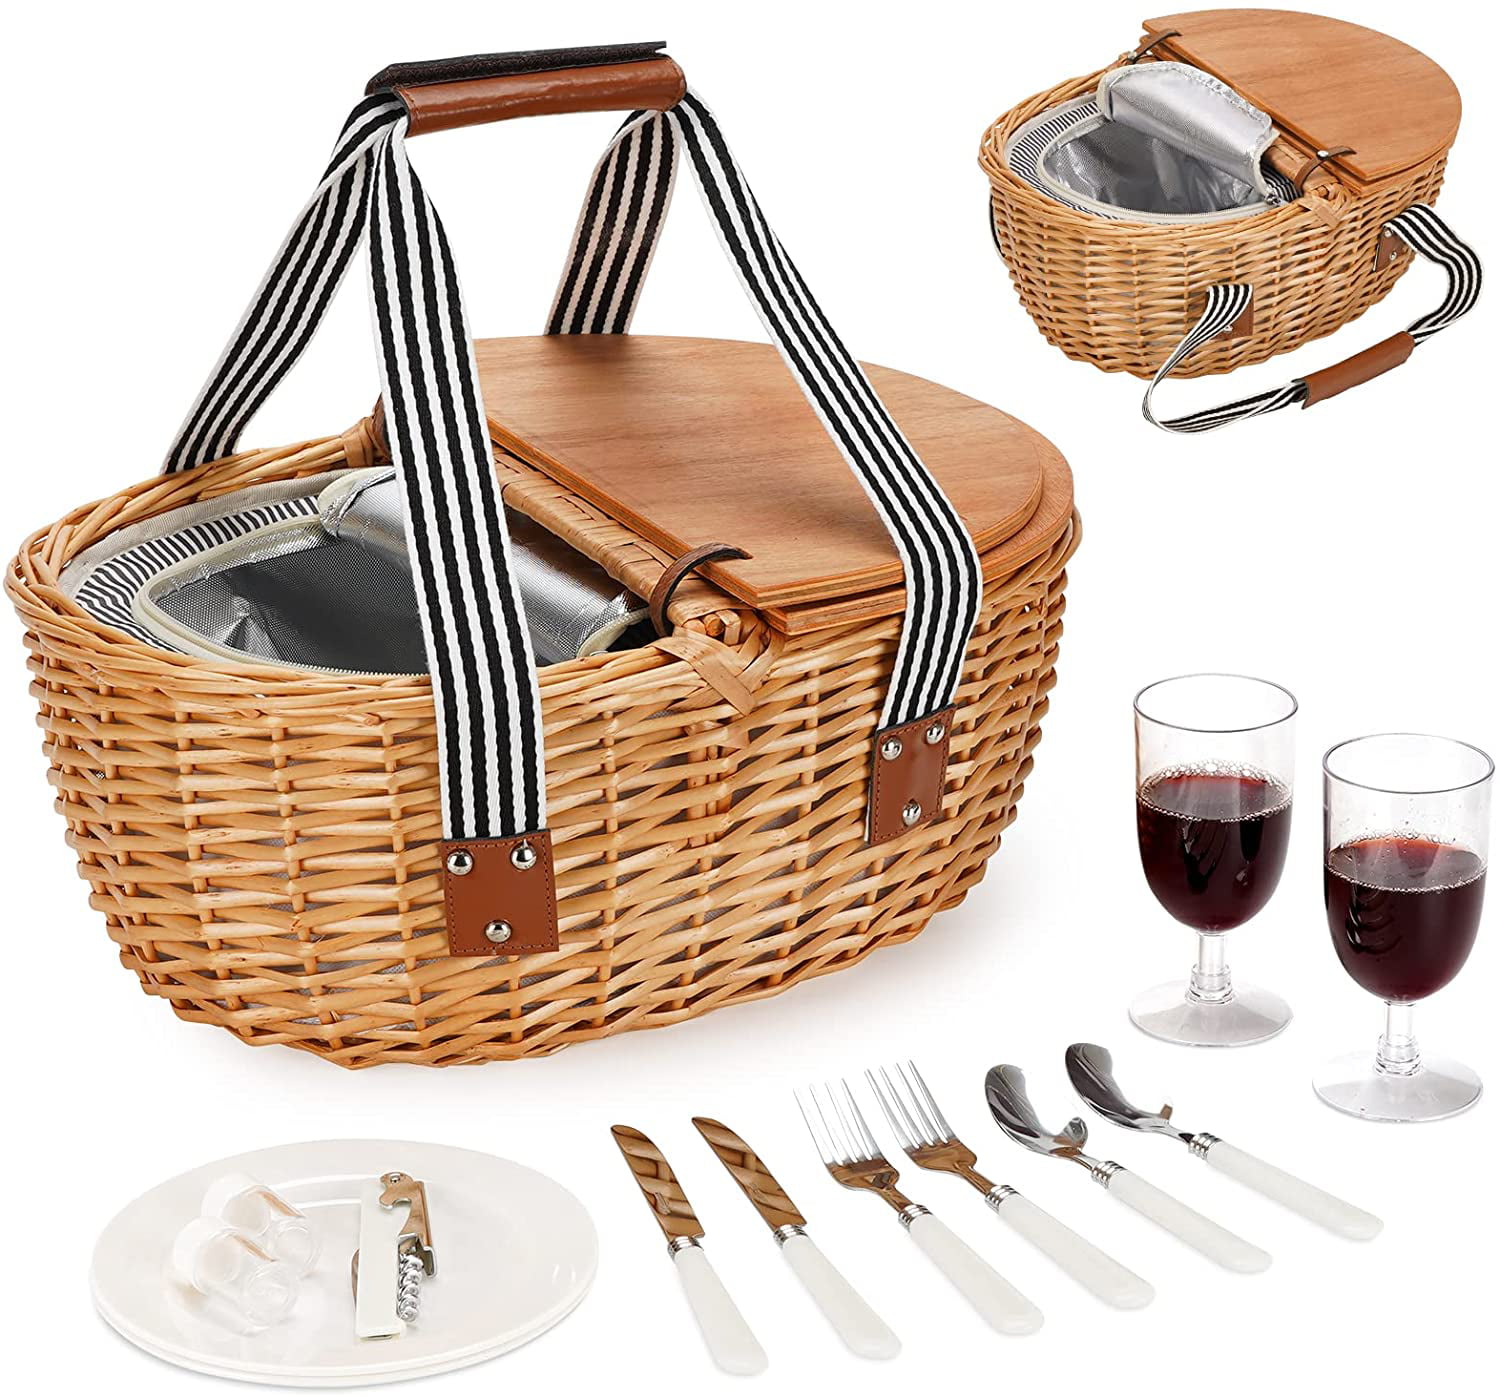 Wicker Picnic Basket for 4 4 Person Picnic Kit Willow Hamper Service Gift Set with Blanket Portable Bamboo Wine Snack Table for Camping and Outdoor Party 